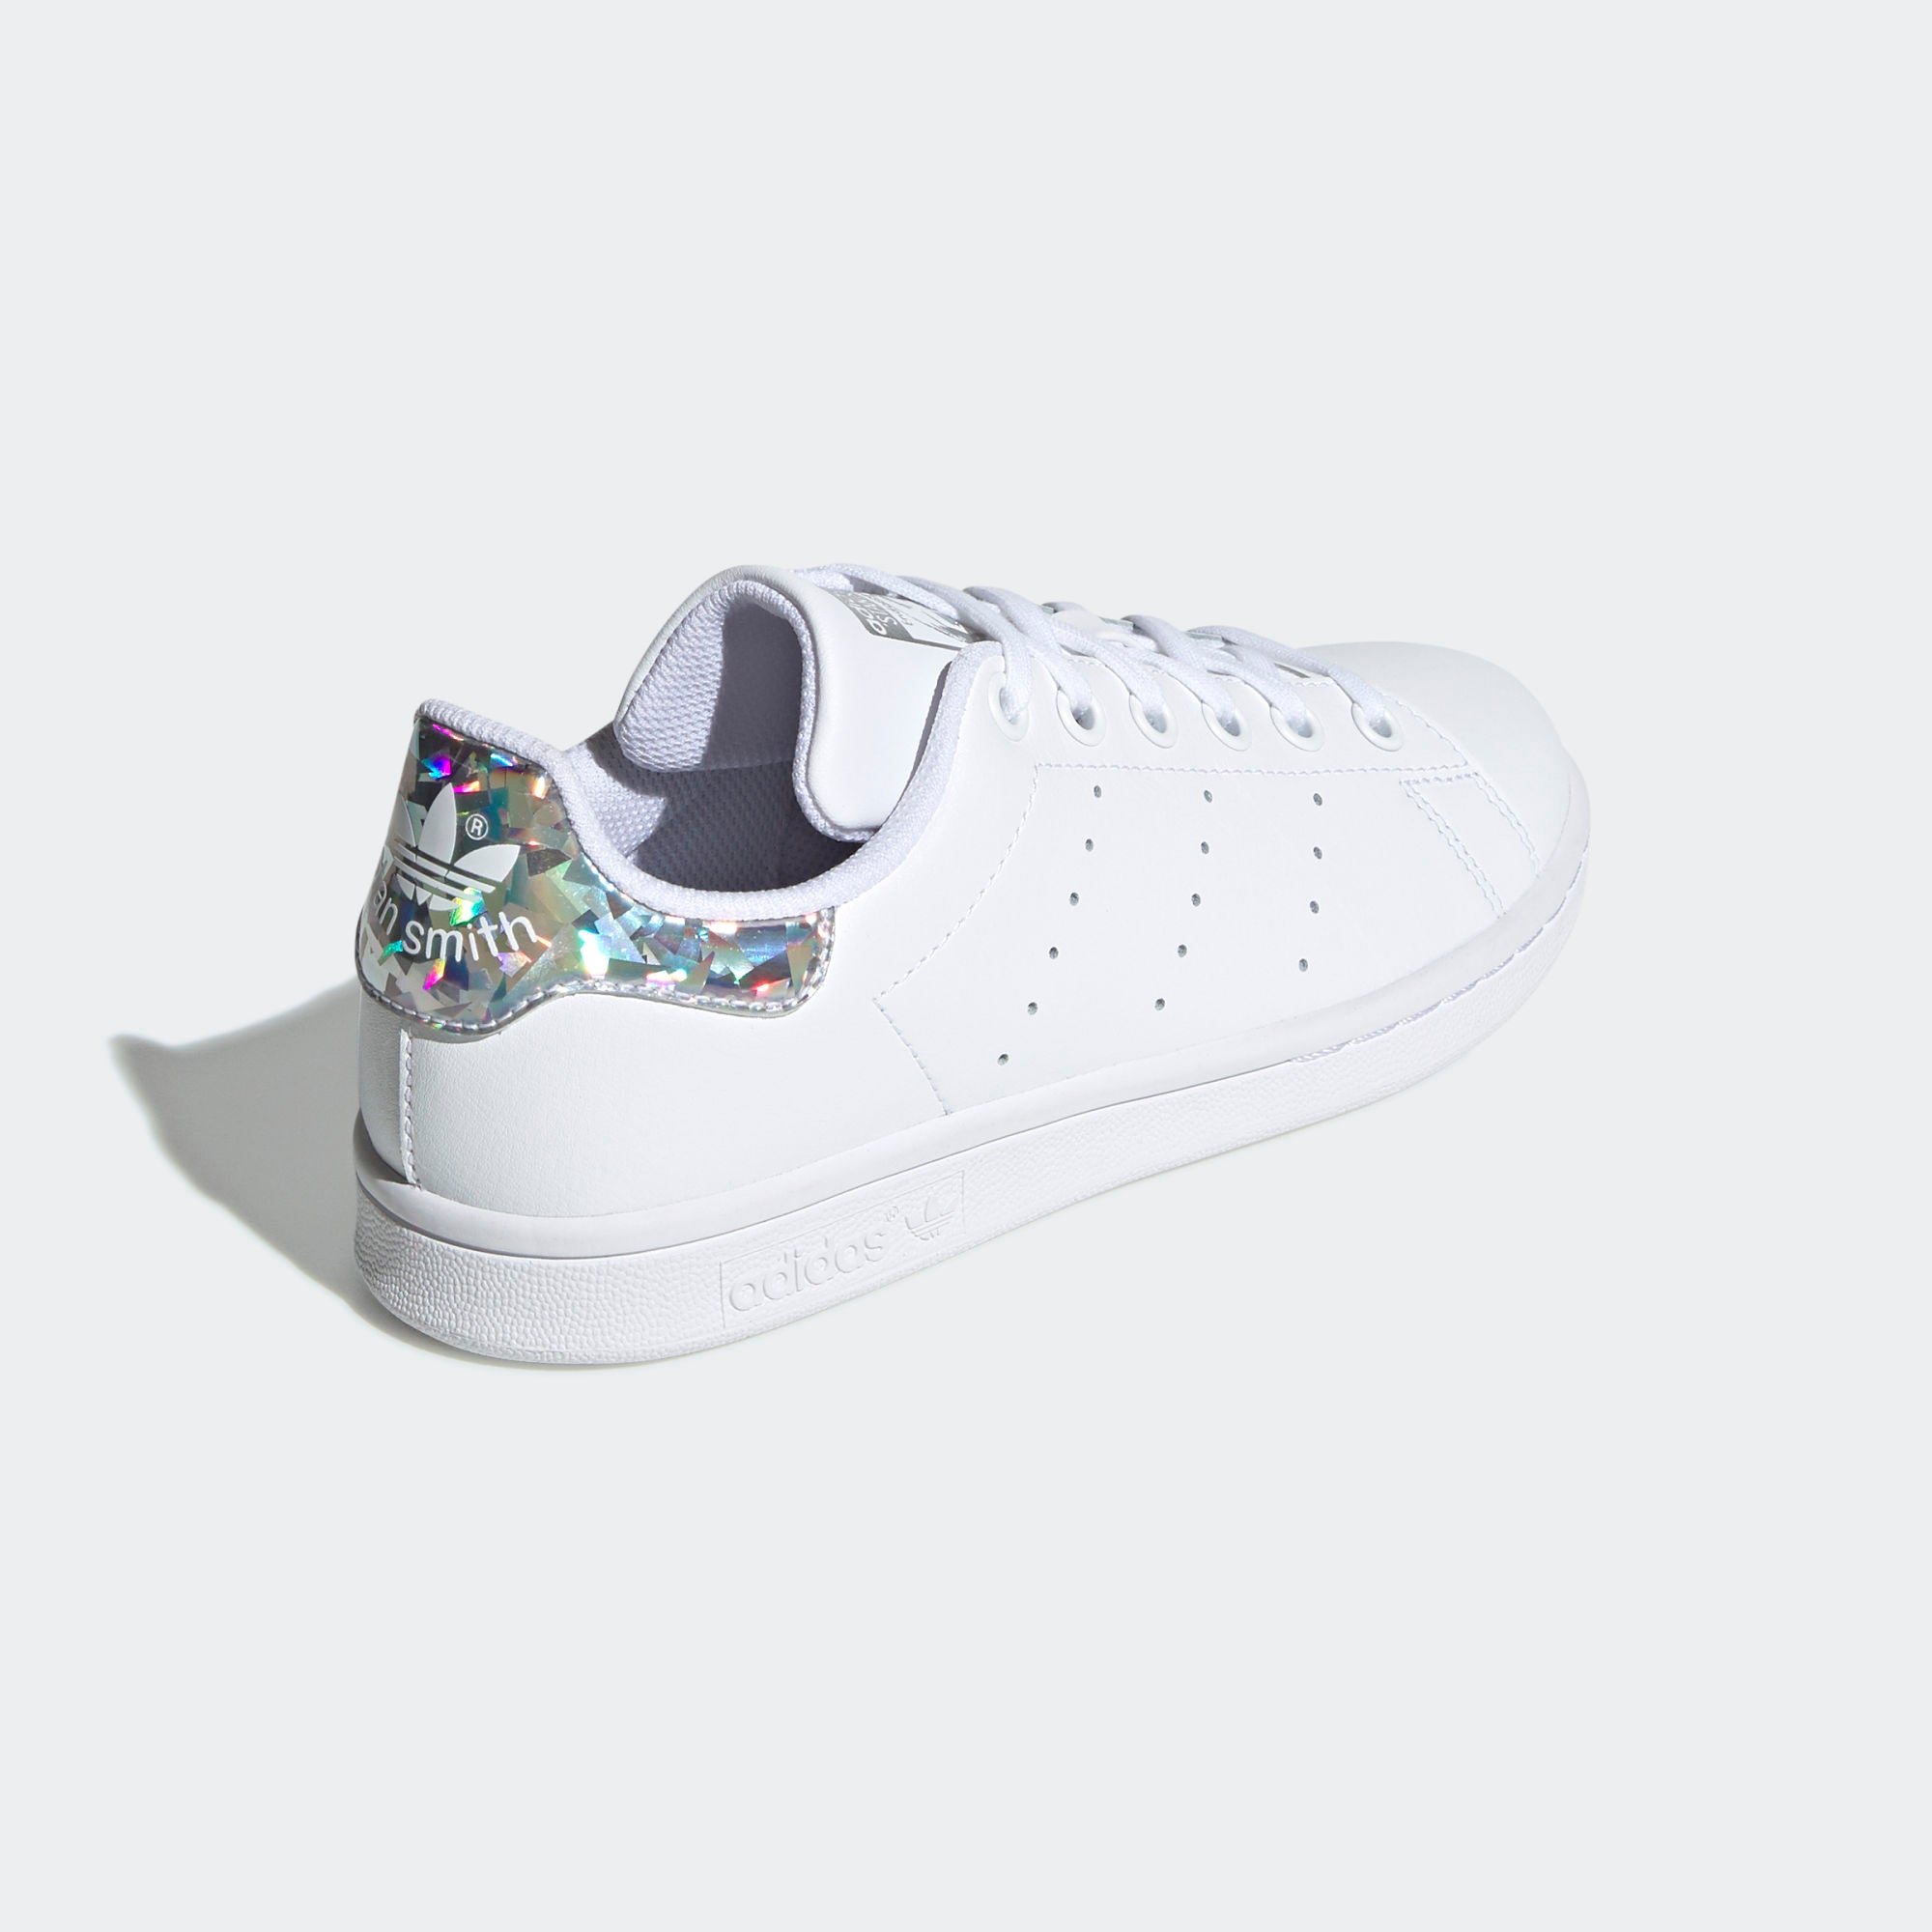 last Wegenbouwproces weerstand adidas Stan Smith Shoes White Silver Iridescent EE8483 | Chicago City Sports